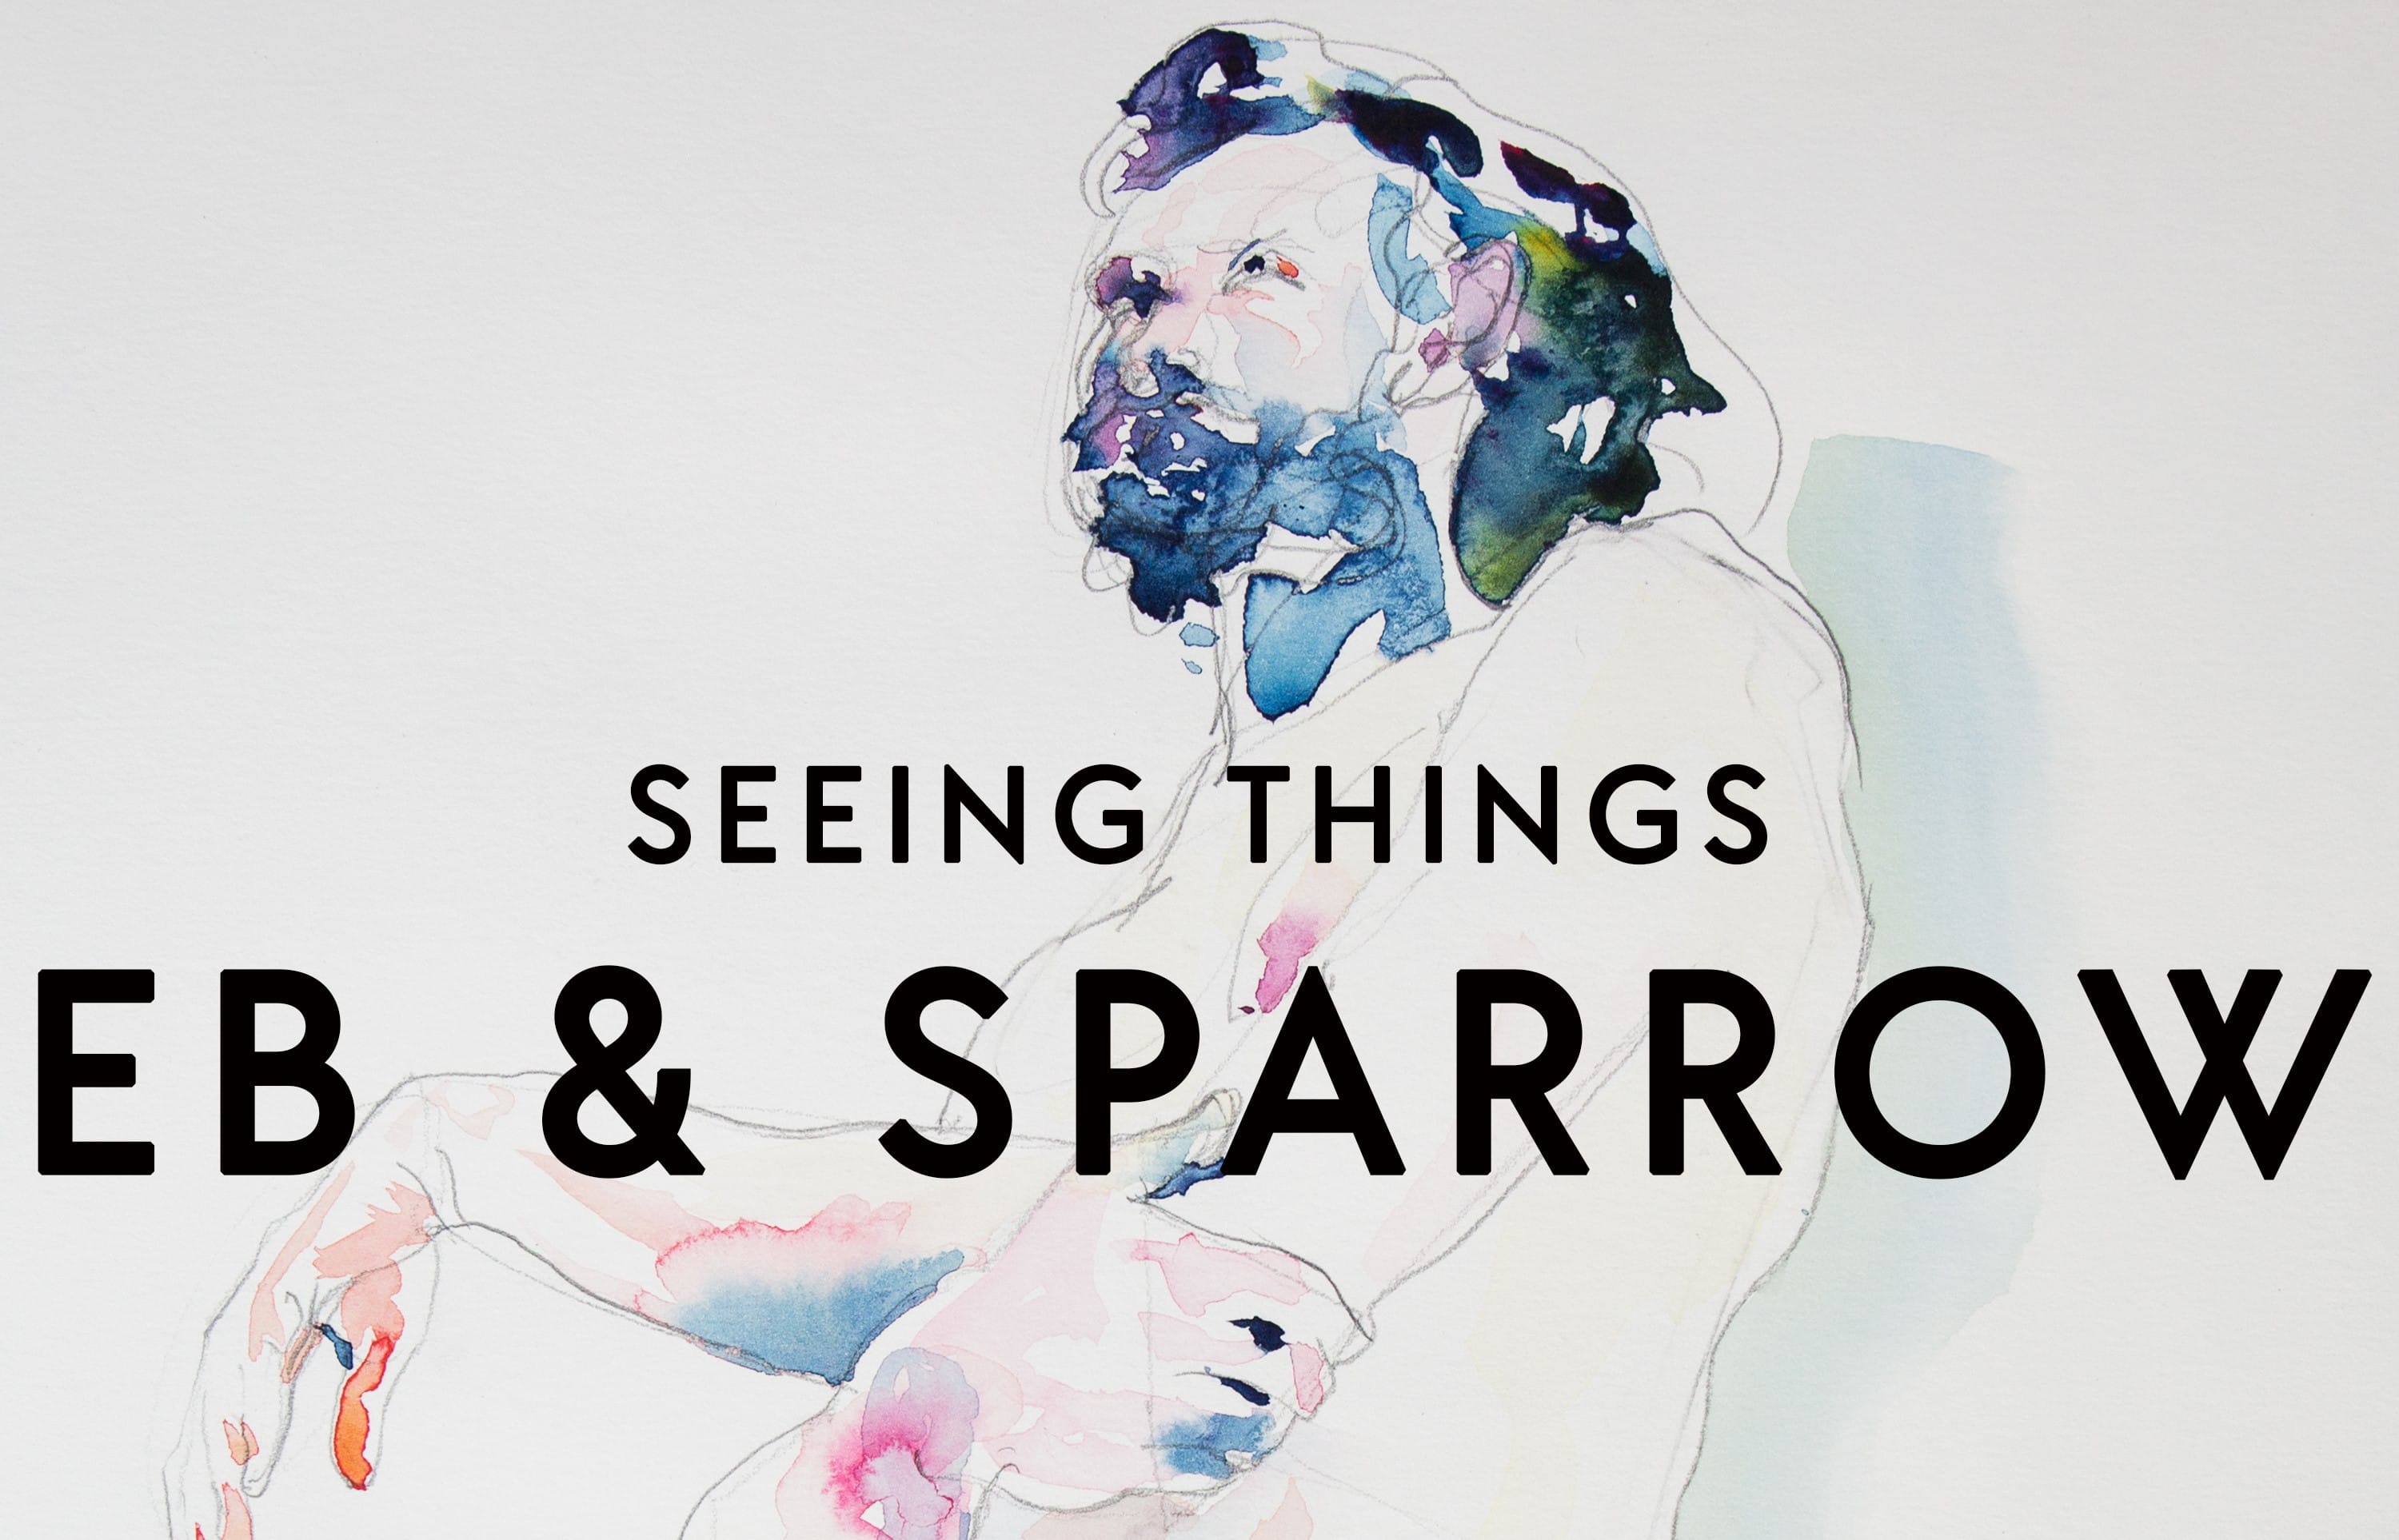 Eb & Sparrow: Seeing Things